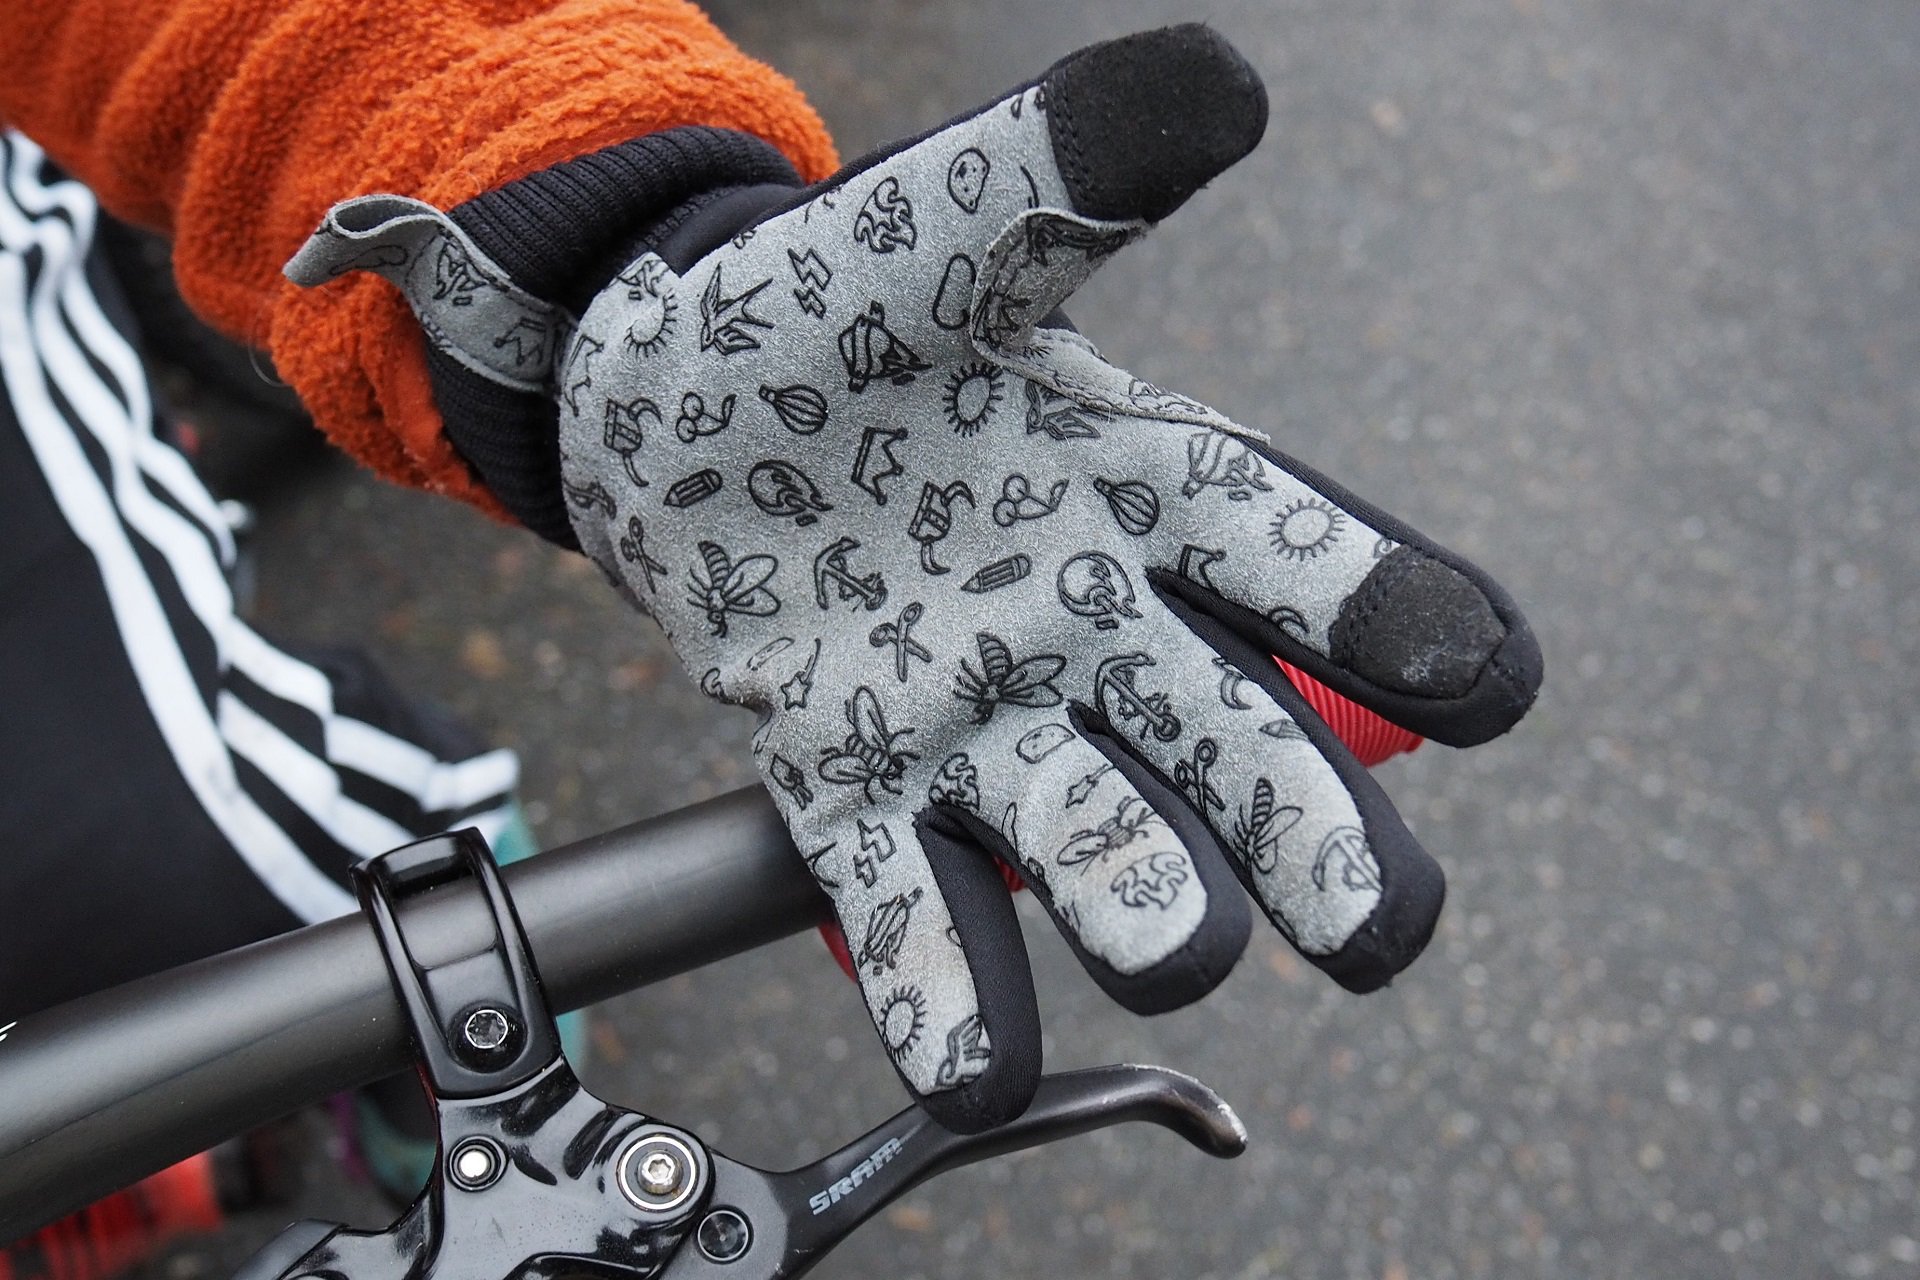 Keeping Kids Comfortable With WOOM's WARM TEN Gloves